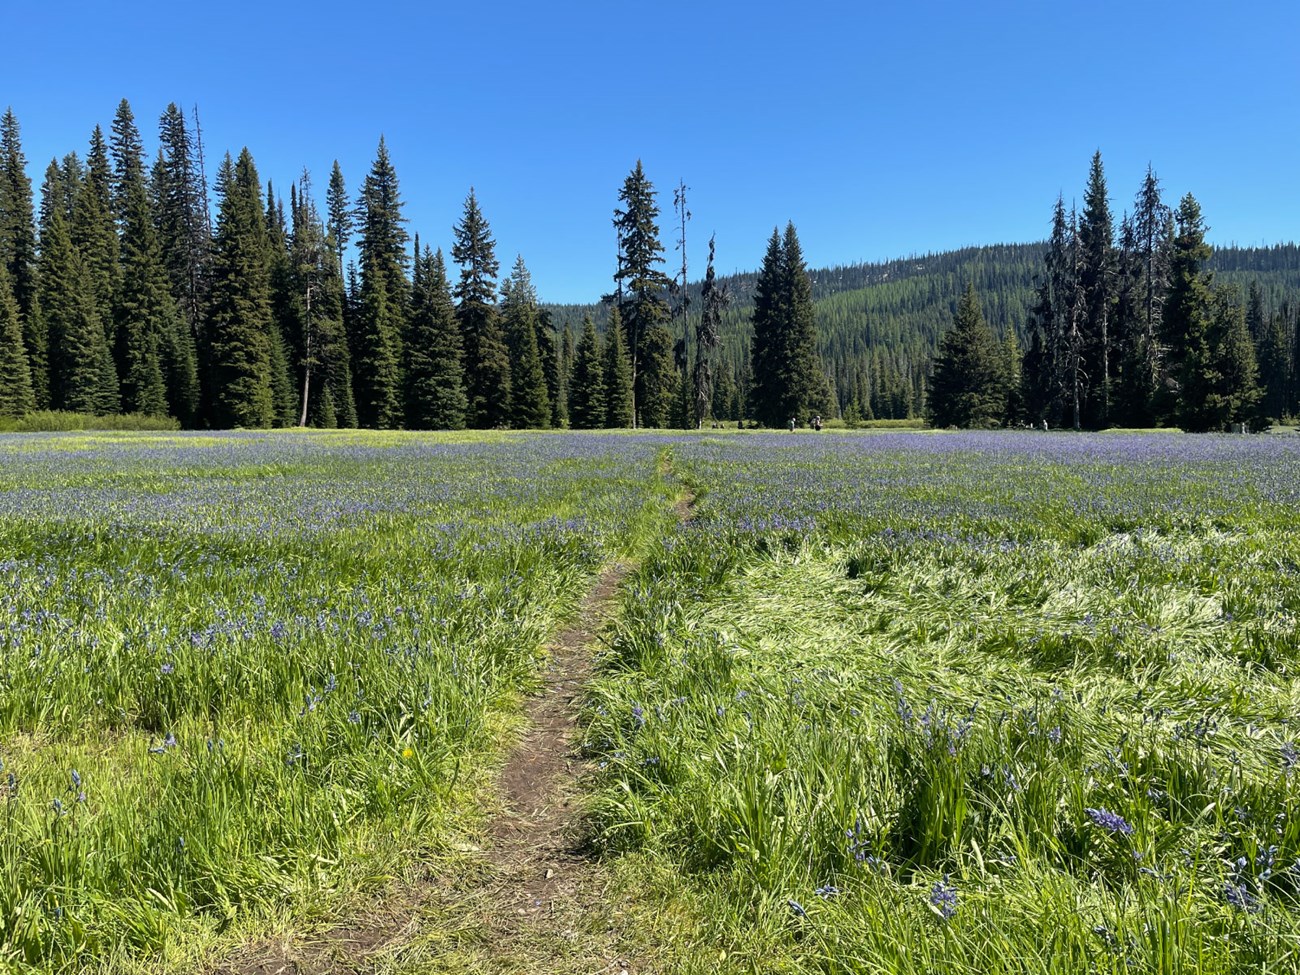 Photo of mountain meadow. Green grass is dotted with purple blue flowers. Evergreen trees and mountains beyond meet a blue sky.